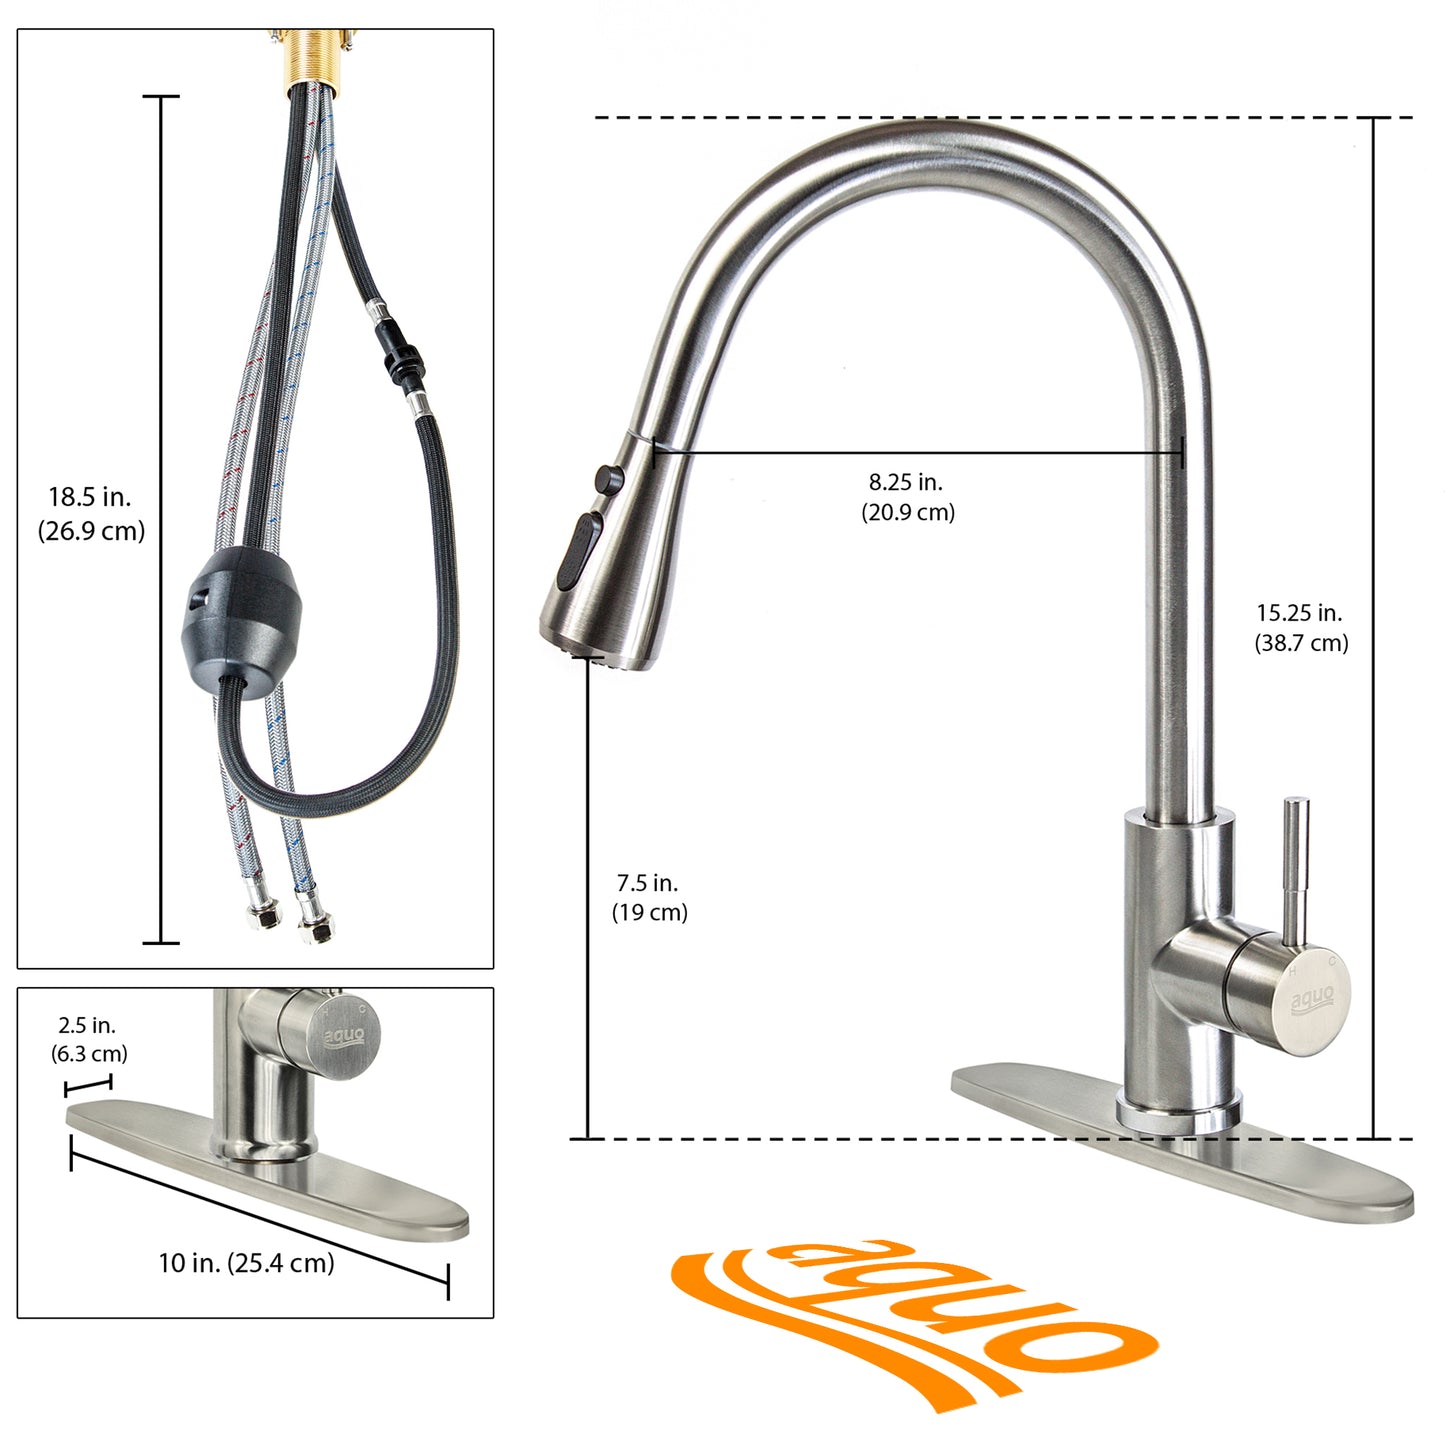 Aquo Kitchen Faucet - This Easy to Install 15" Height Sink Faucet Hole Variety Kitchen Countertops, Nicely Preventing Leaking Issue by Brass Kitchen Sink Faucet Inner Hoses Design, Brushed Nickel, Model-205001-BN